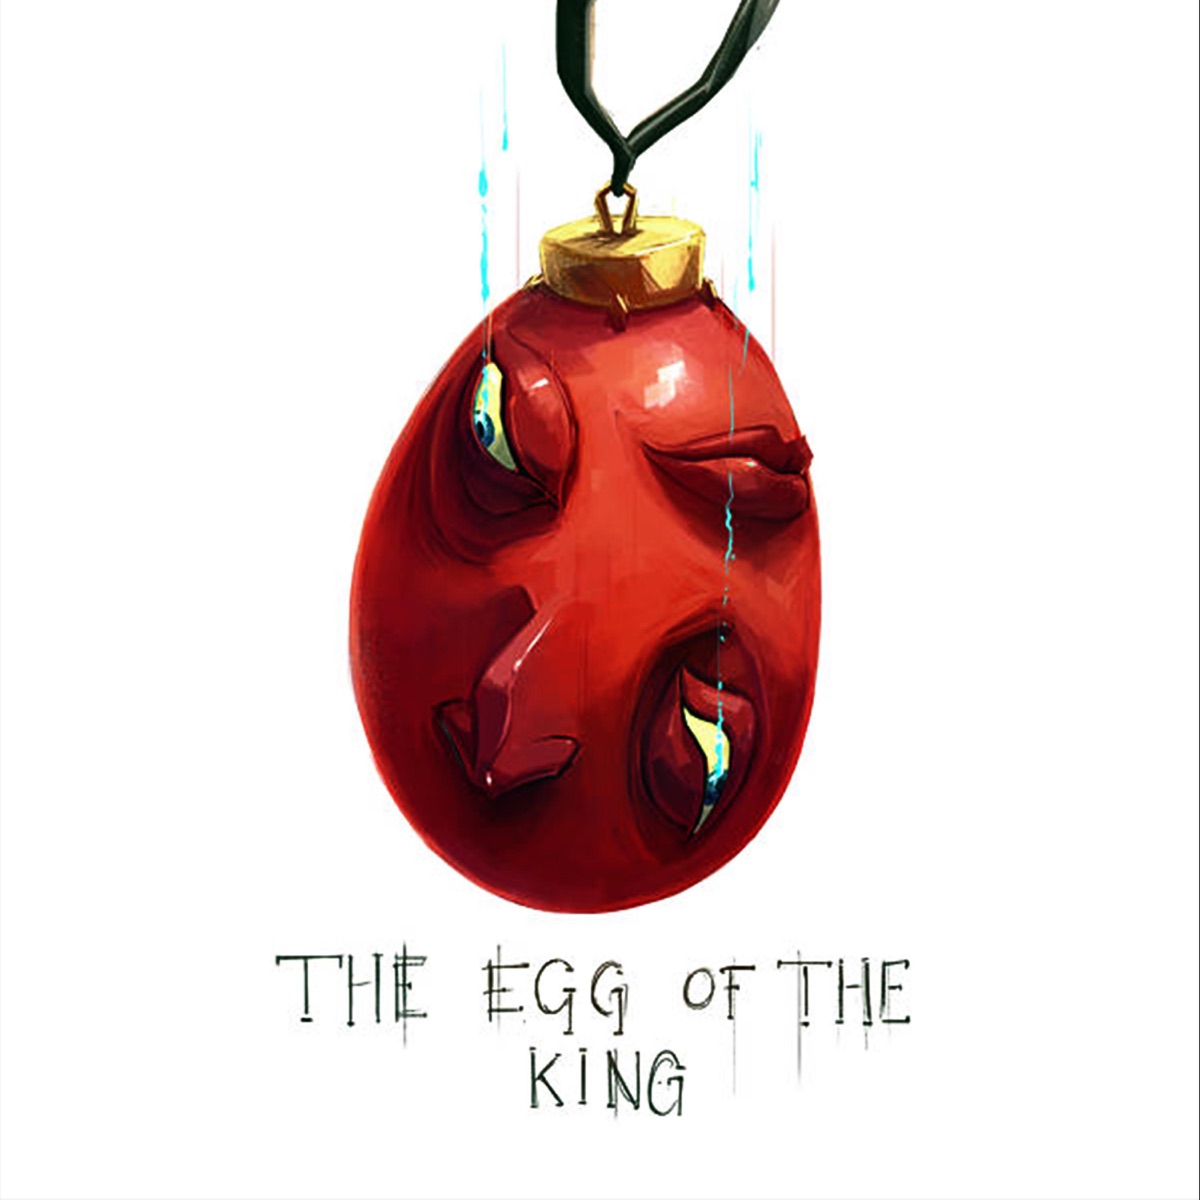 How To Get Egg of the King!